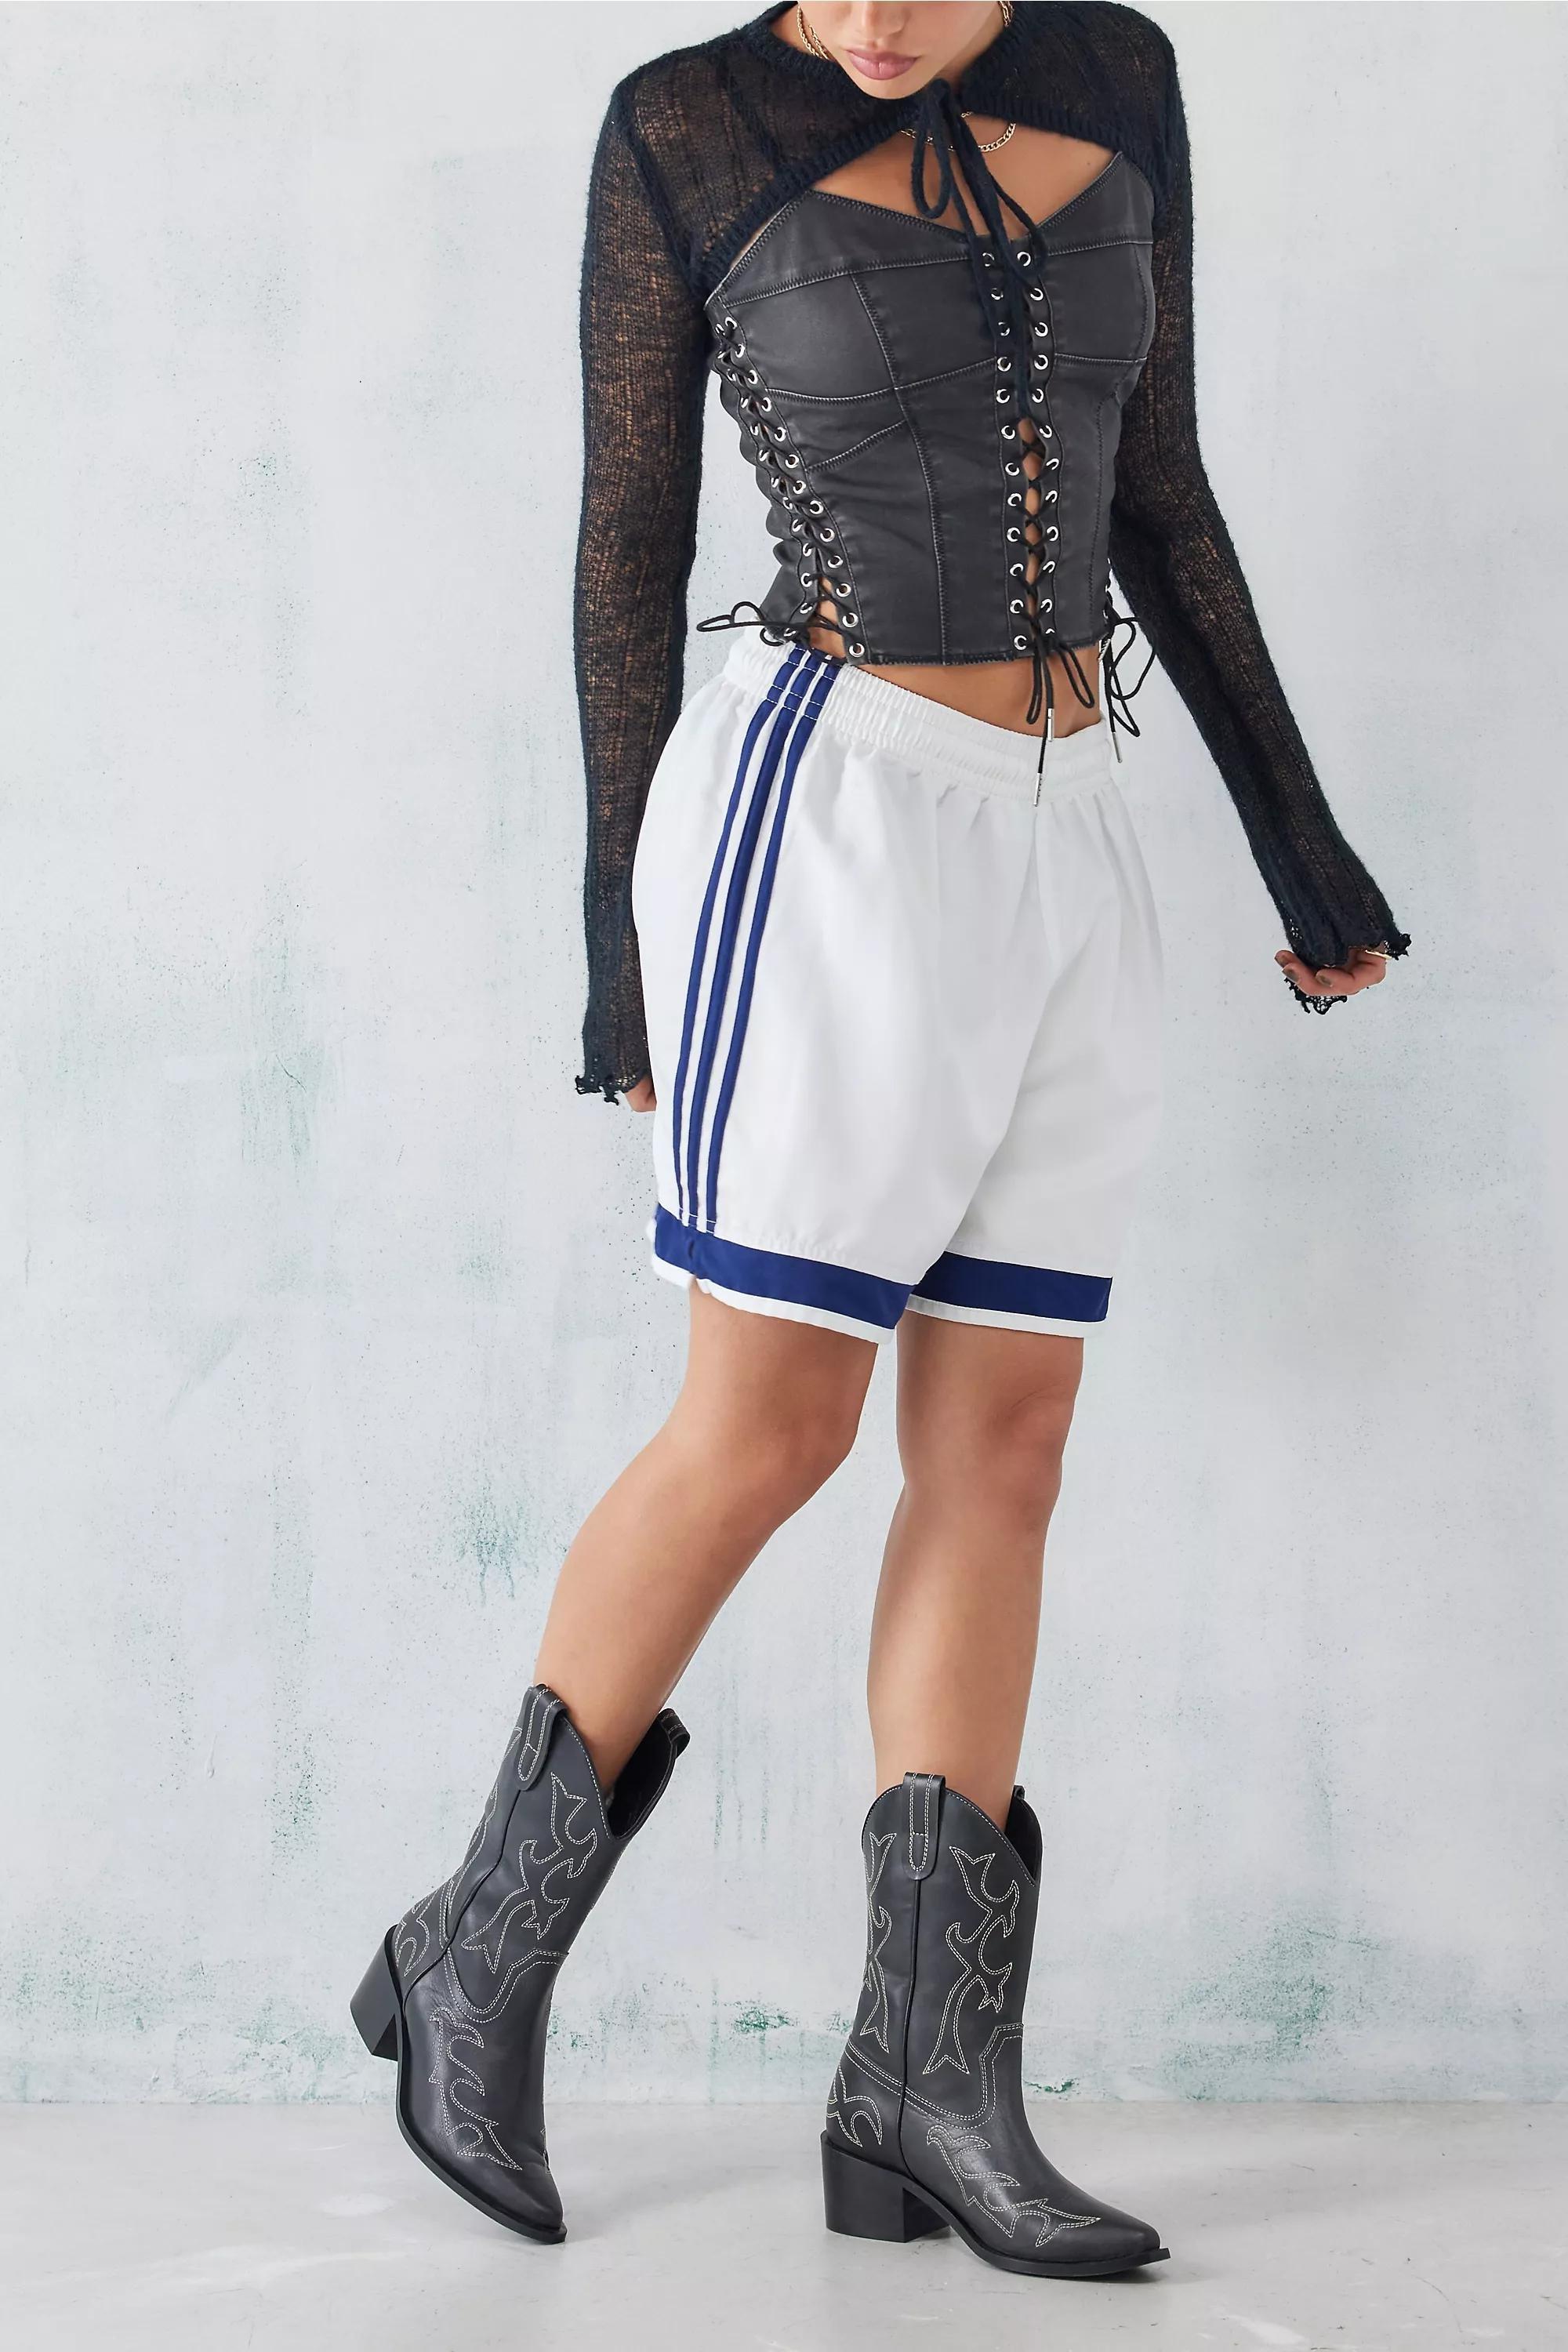 Urban Outfitters - Black Western Cowboy Boots